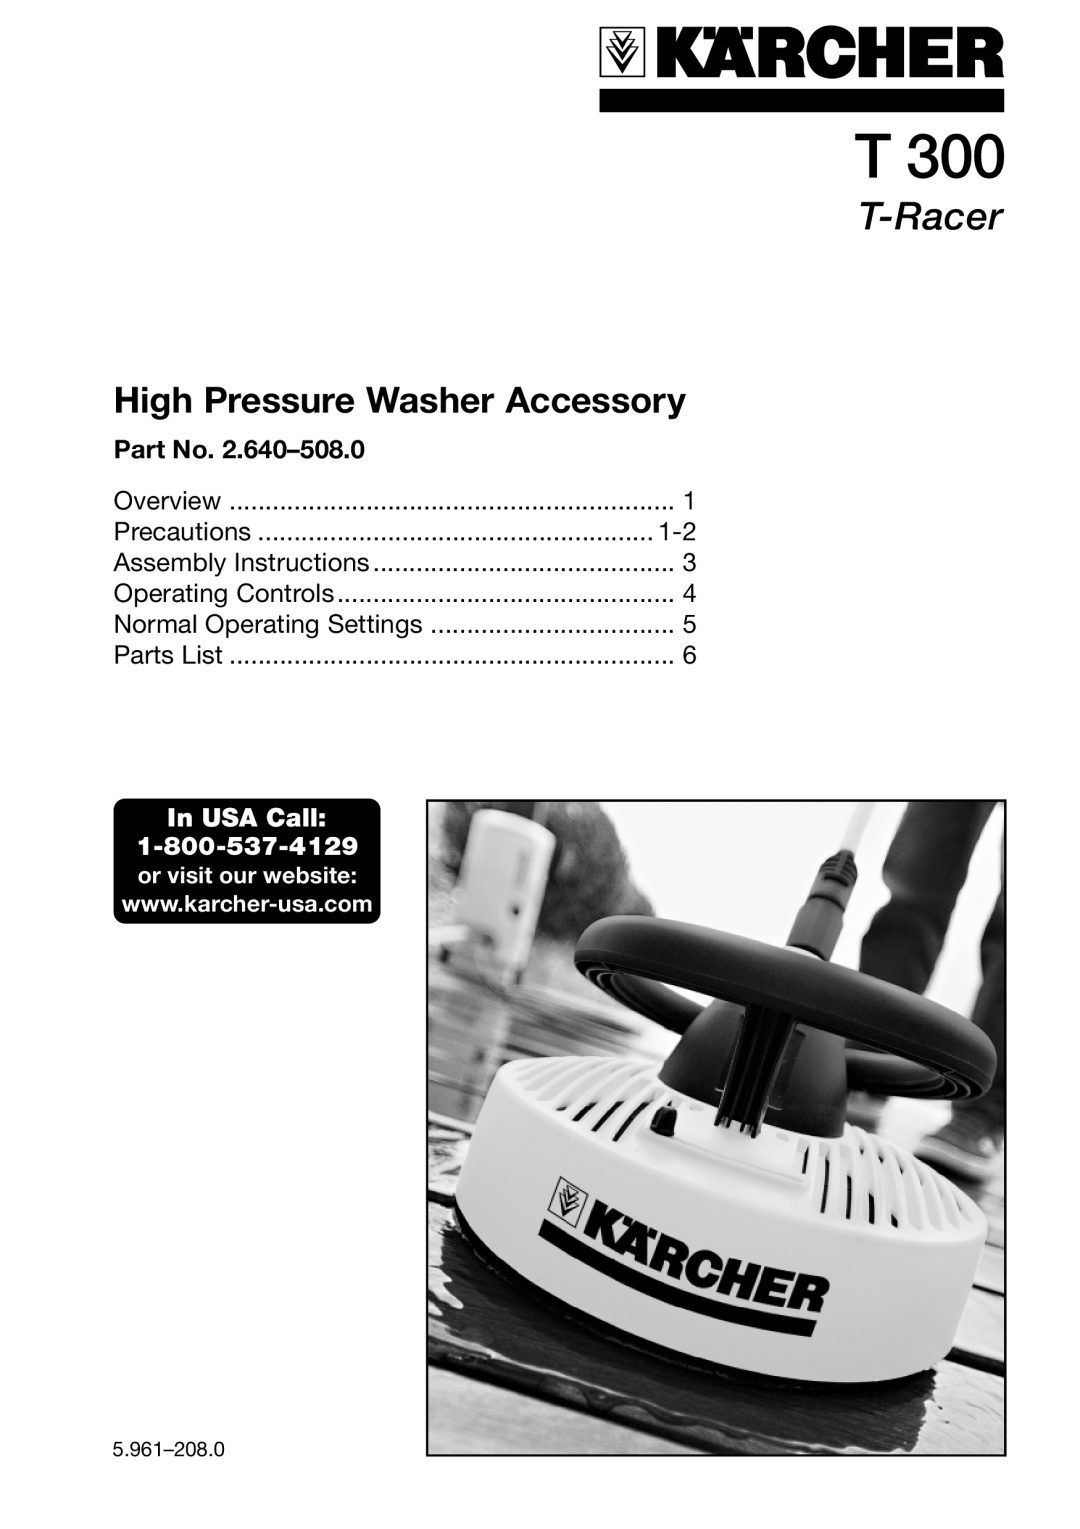 Karcher T-Racer, T 300 manual 5.961-208.0, High Pressure Washer Accessory, Overview, Precautions, Assembly Instructions 